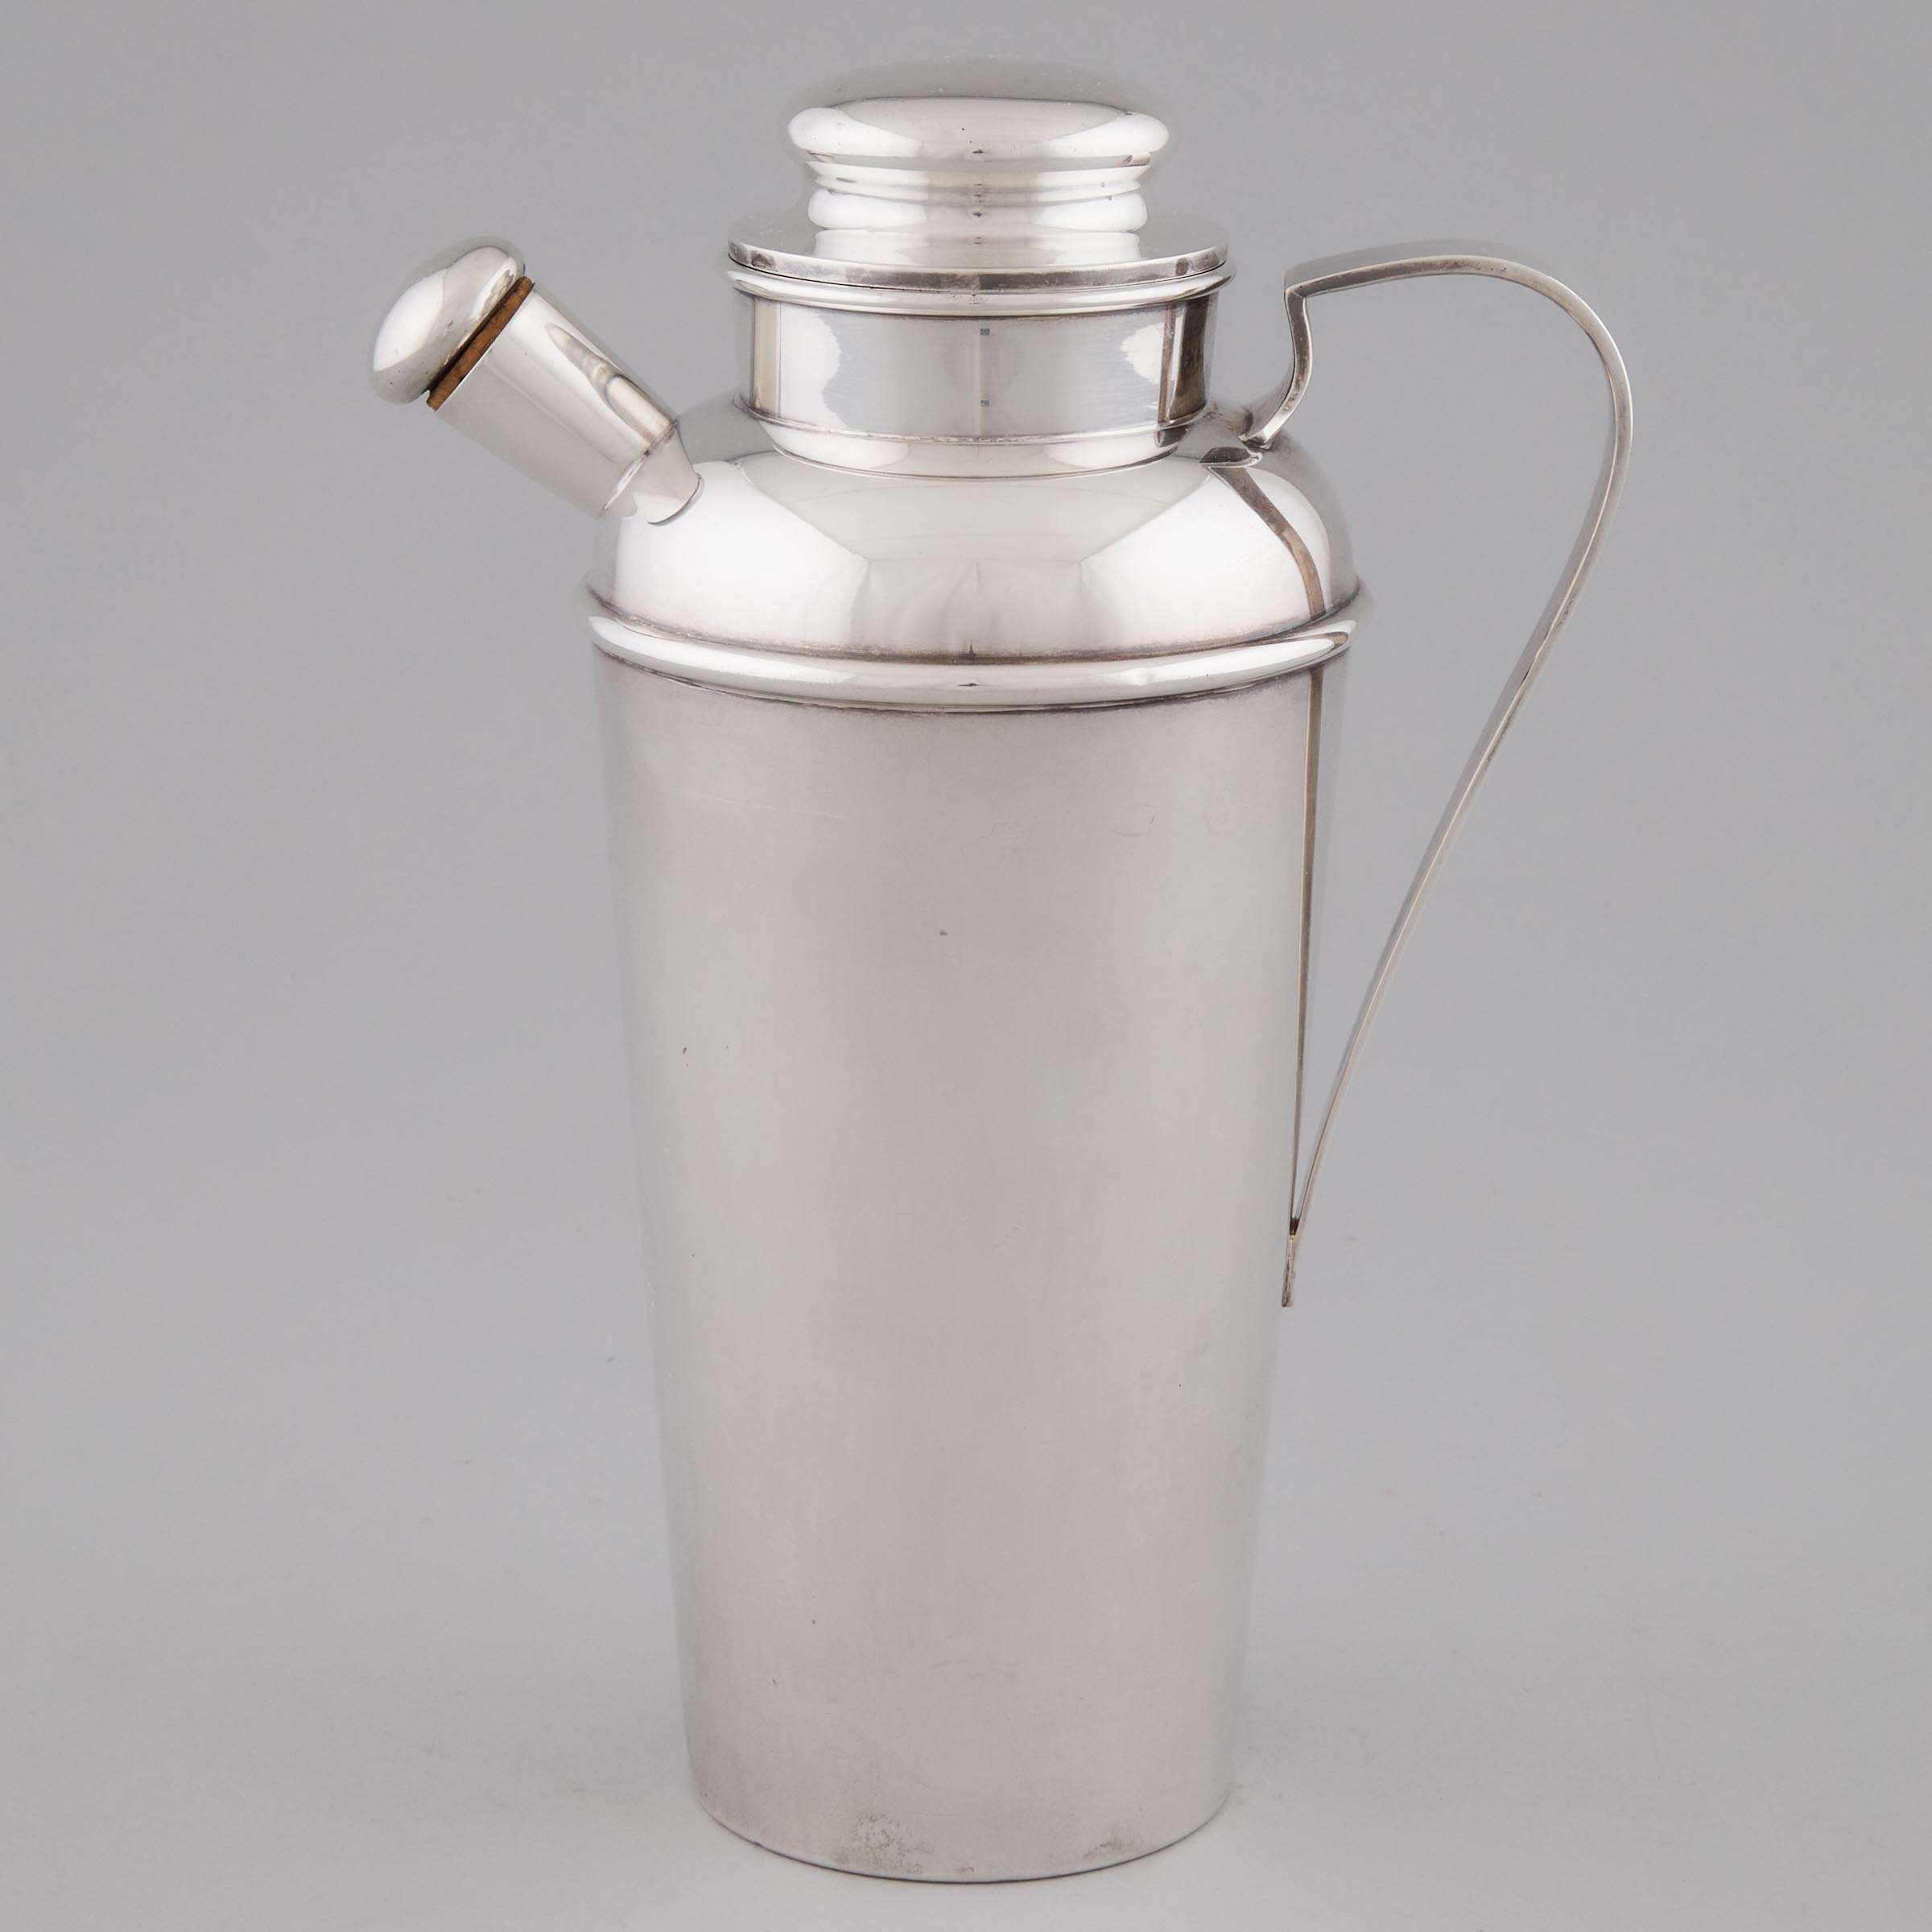 American Silver Cocktail Shaker, Gorham Mfg. Co., Providence, R.I., 20th century